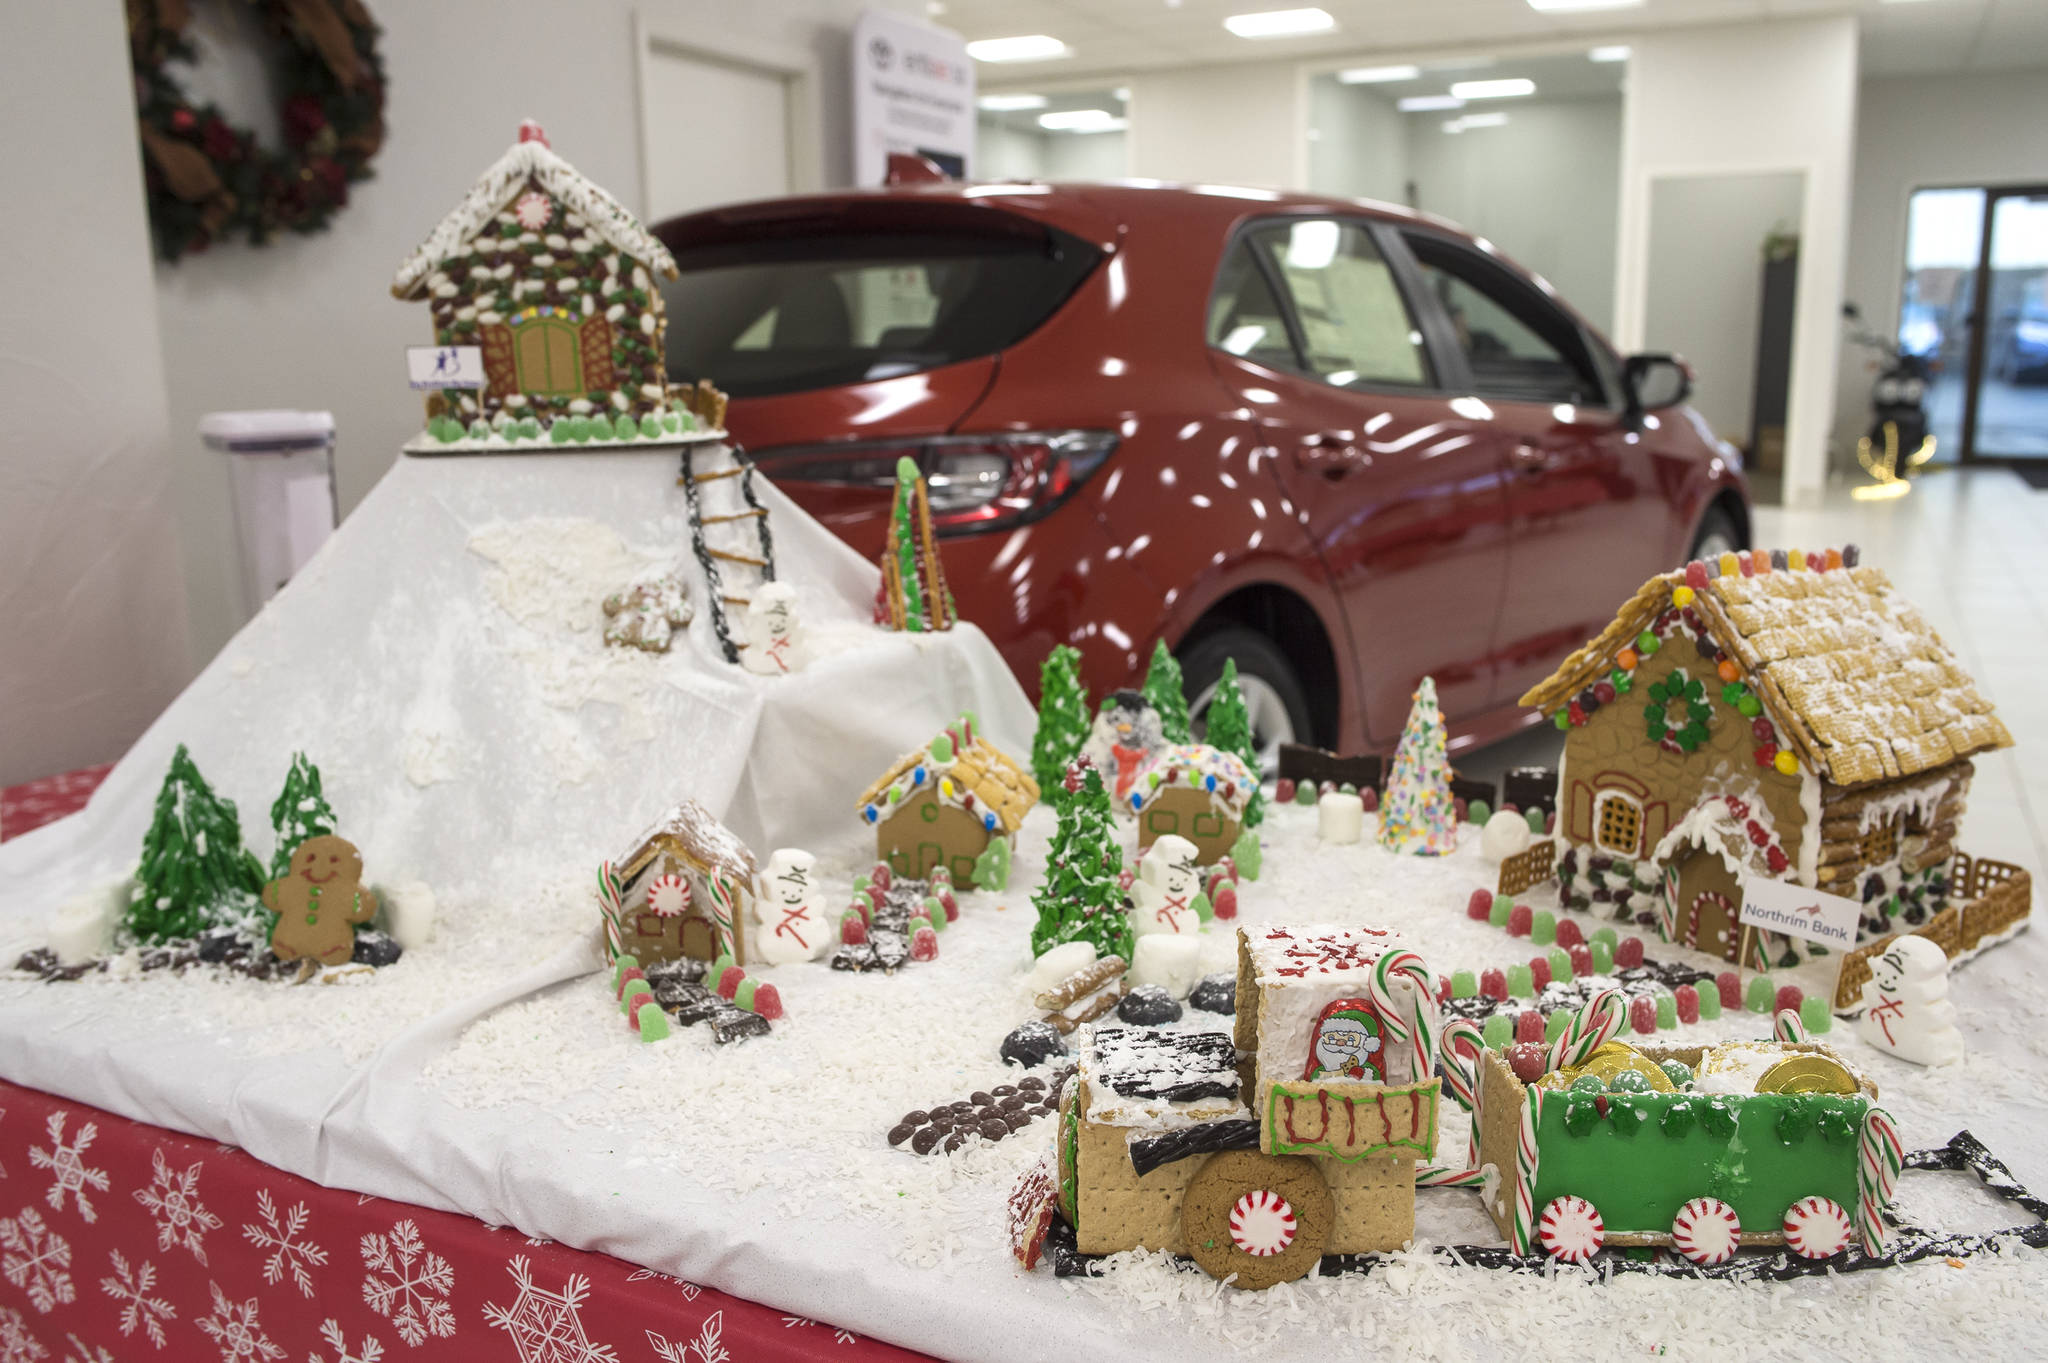 A gingerbread house entered by Northrim Bank sits on display at Mendenhall Auto on Wednesday, Dec. 12, 2018. The displays are a fundraiser for the Southeast Alaska Foodbank. (Michael Penn | Juneau Empire)